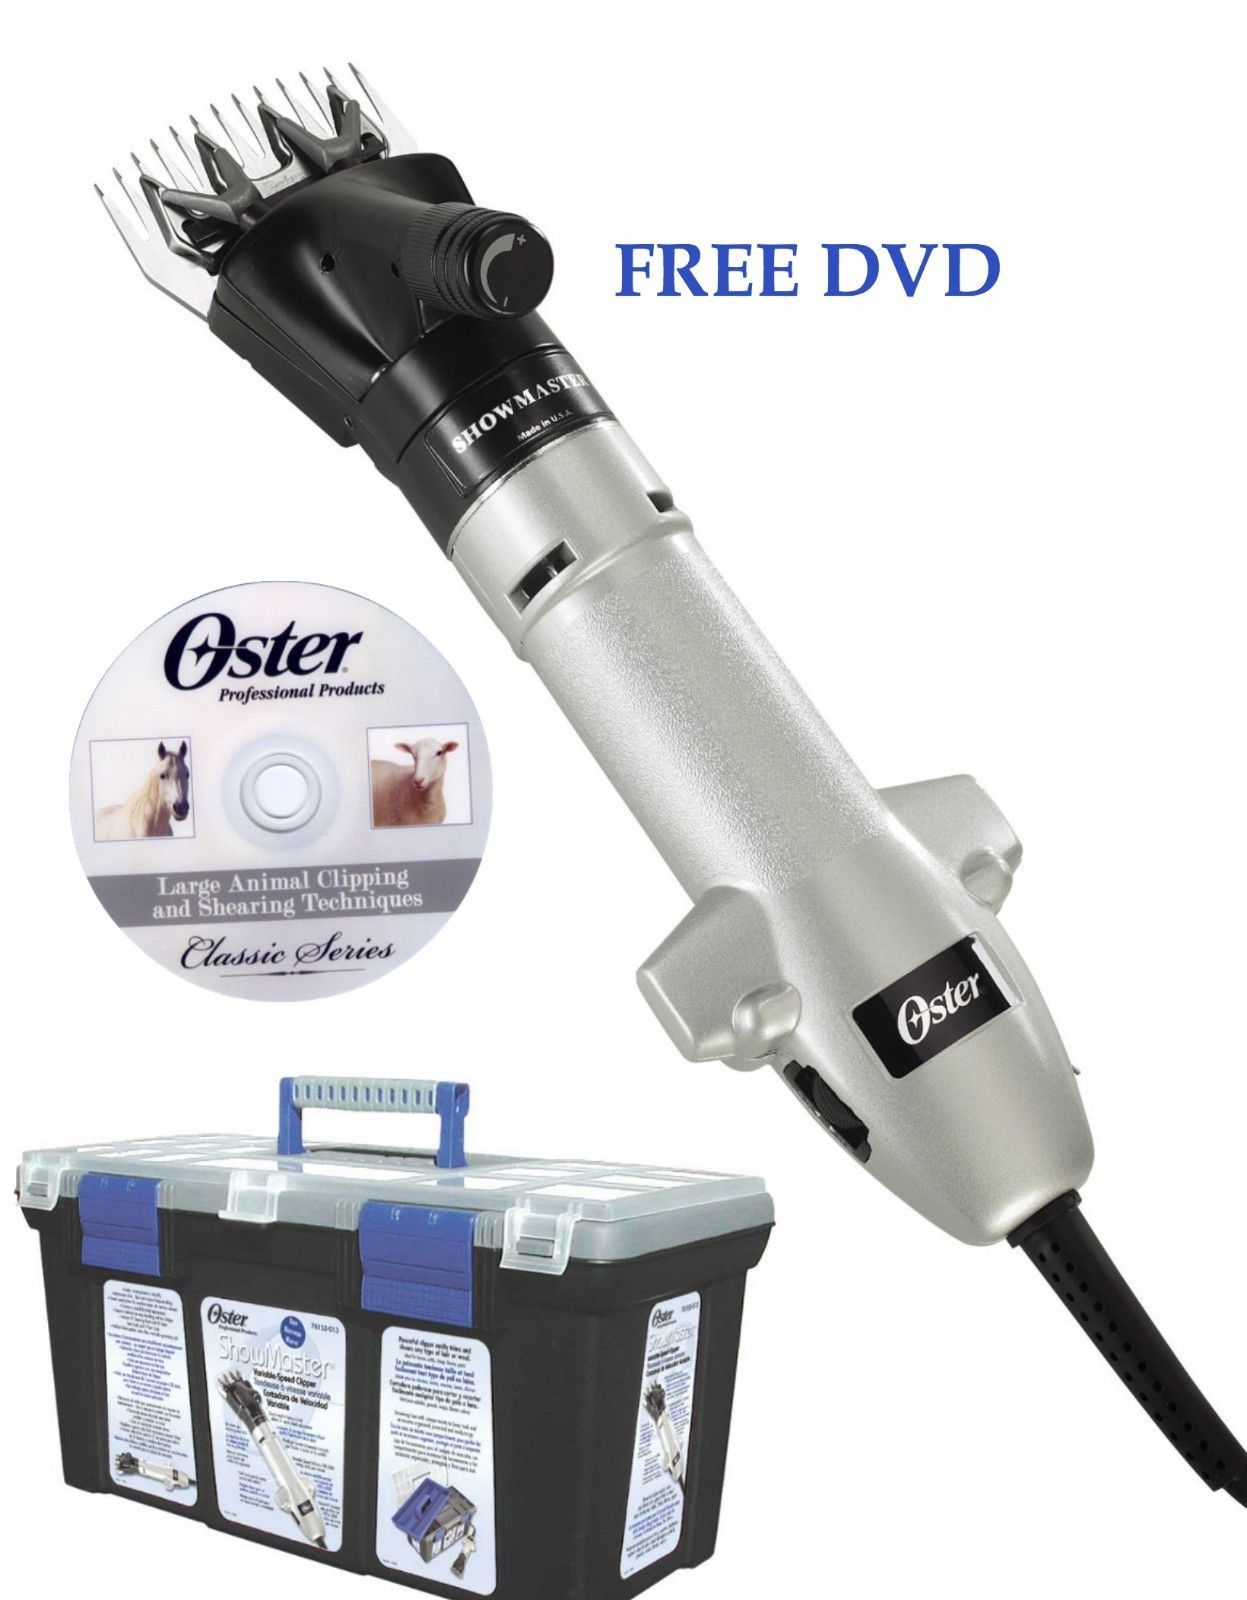 Oster SHOWMASTER Variable Sp Shearing Machine Clipper 78153-013 CryogenX Blade - $344.95